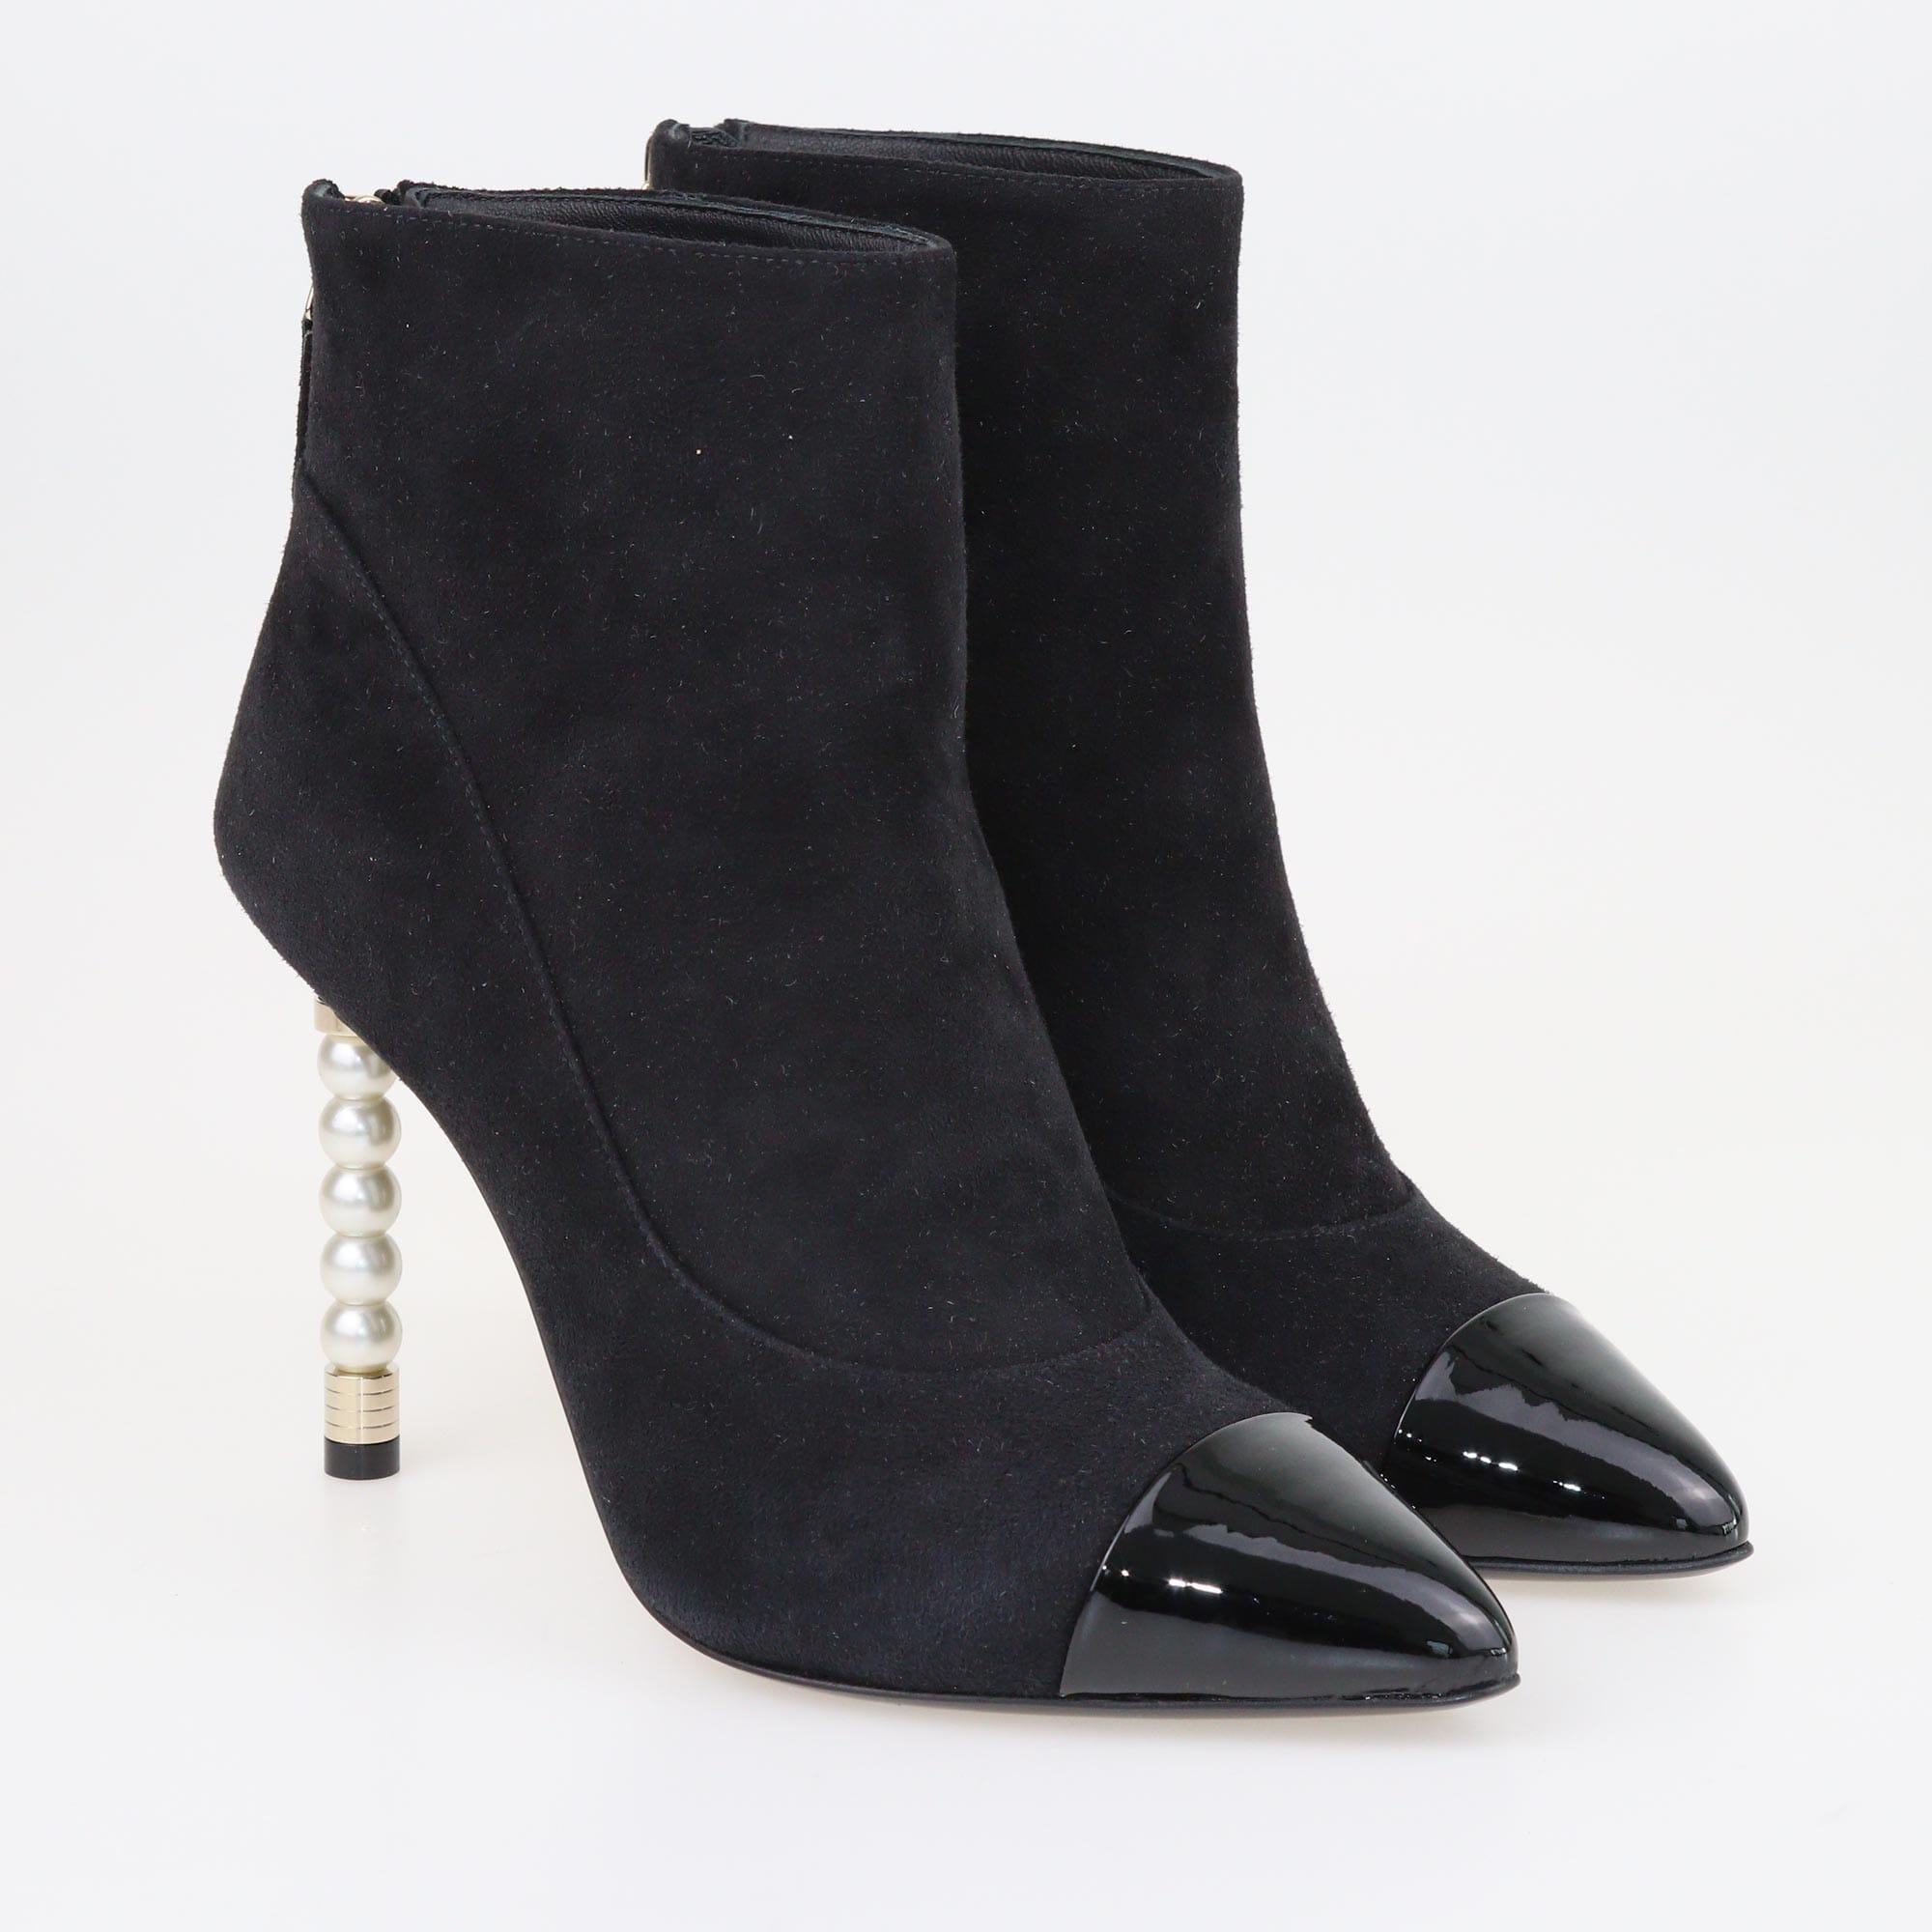 Black Pearl Track Heels Booties Ankle Boots Shoes Chanel 